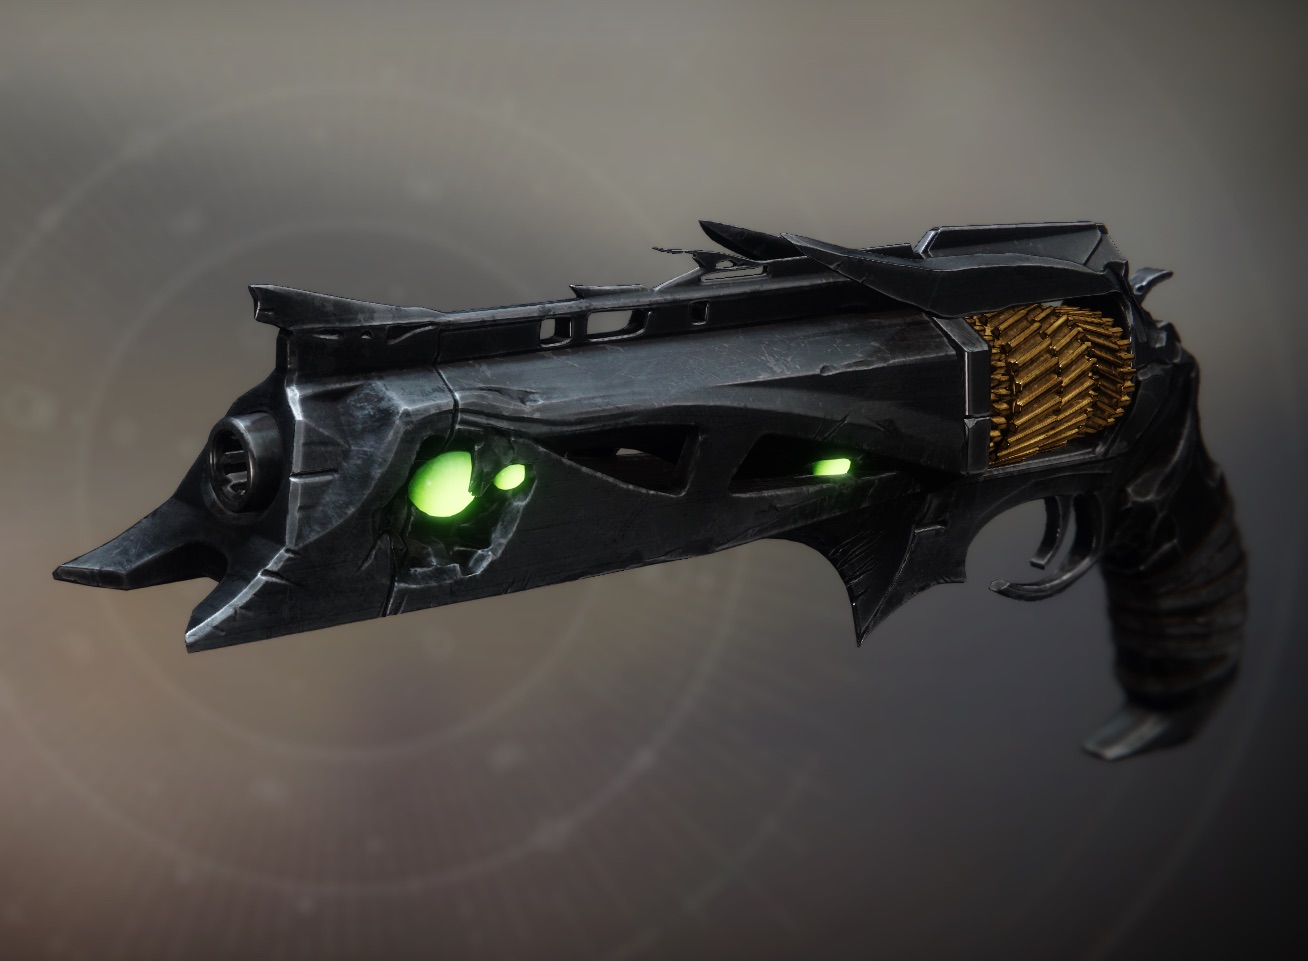 Destiny 2’s Thorn Exotic hand cannon sits against a grey background